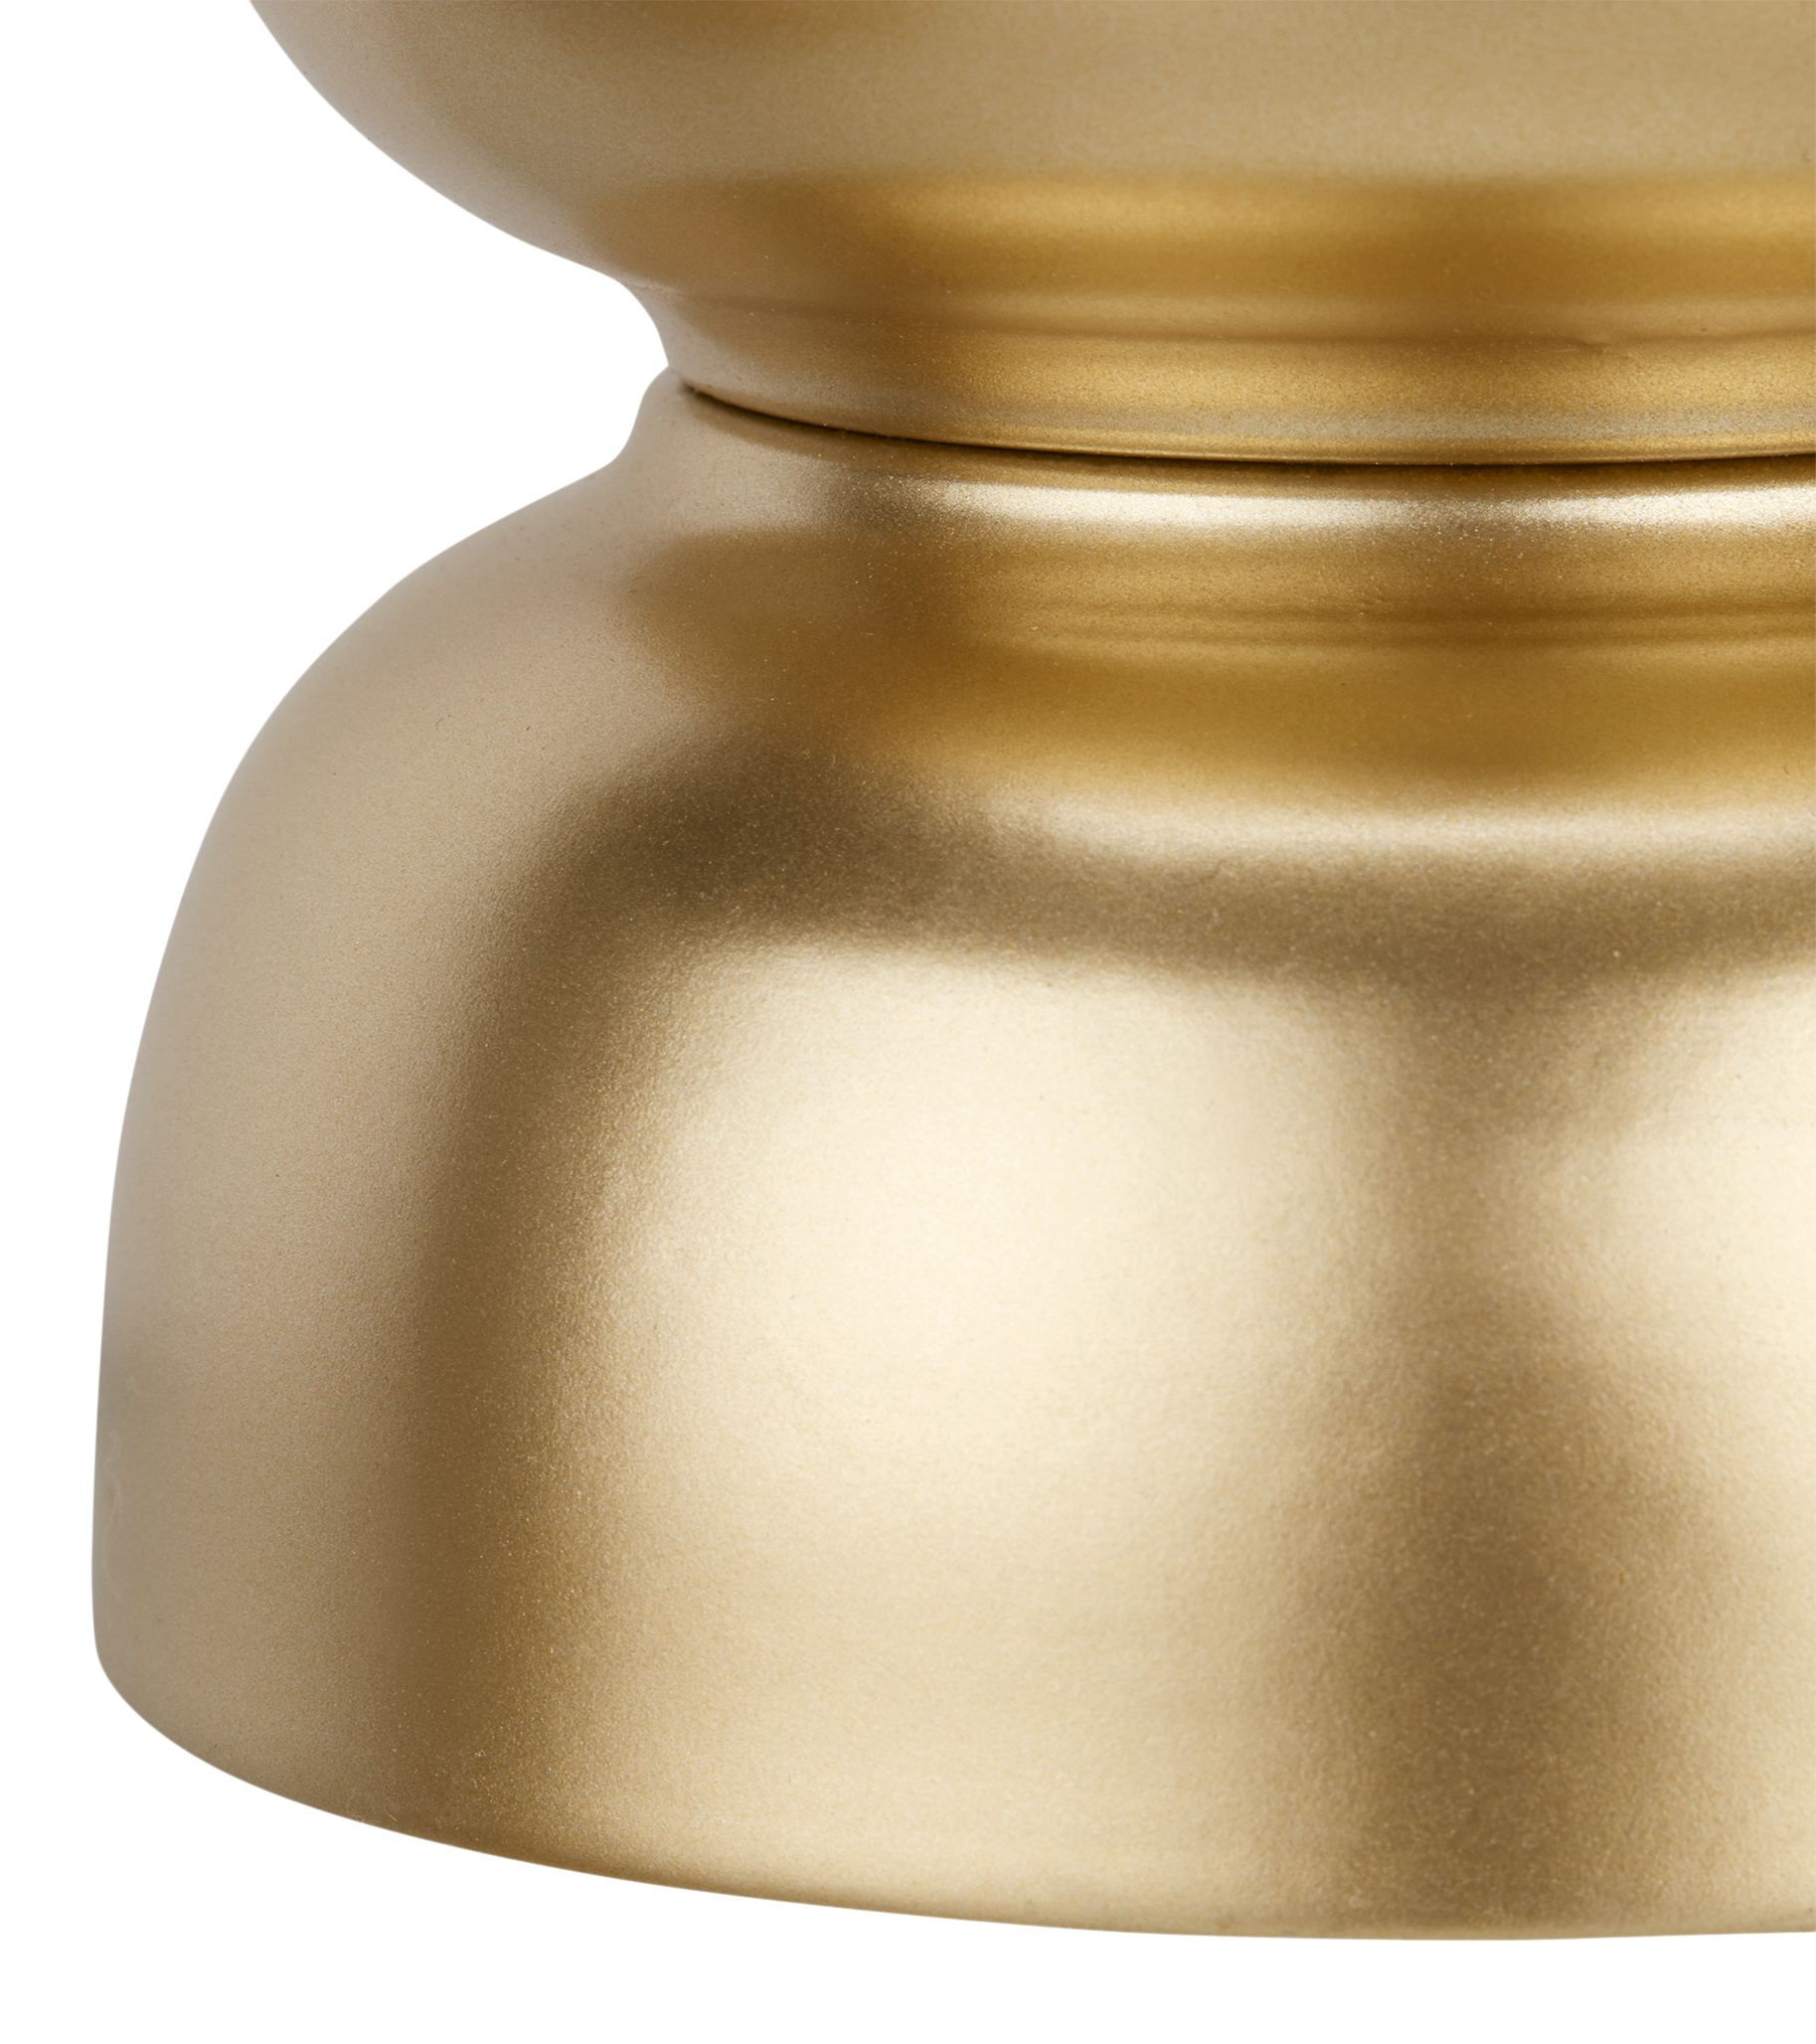 Hourglass Gold Metal Candle